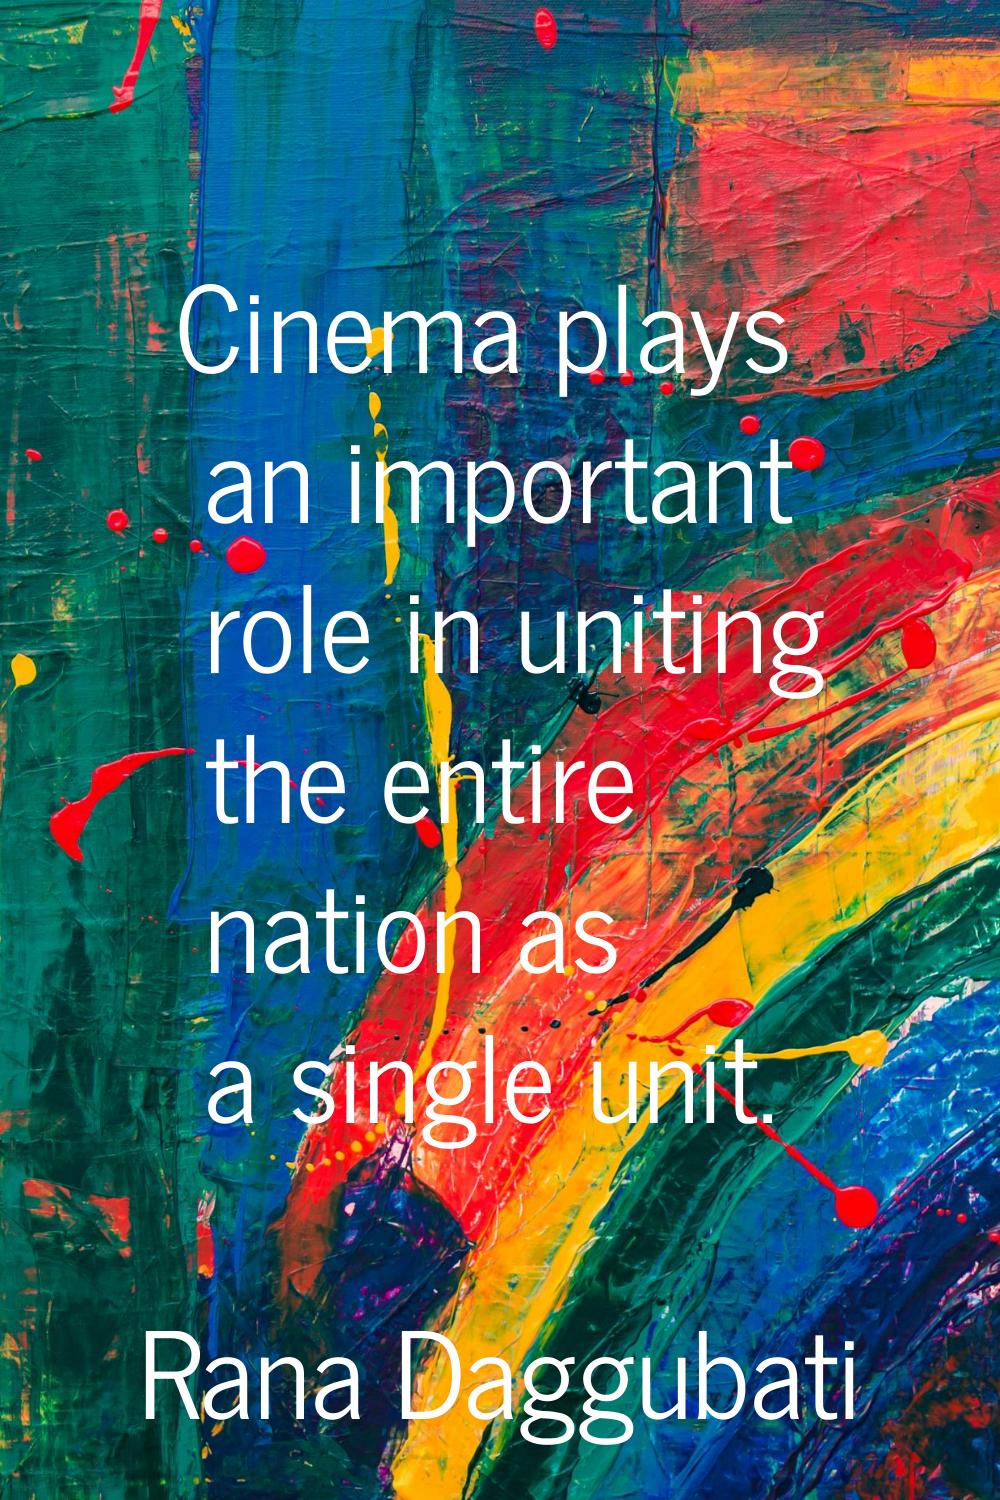 Cinema plays an important role in uniting the entire nation as a single unit.